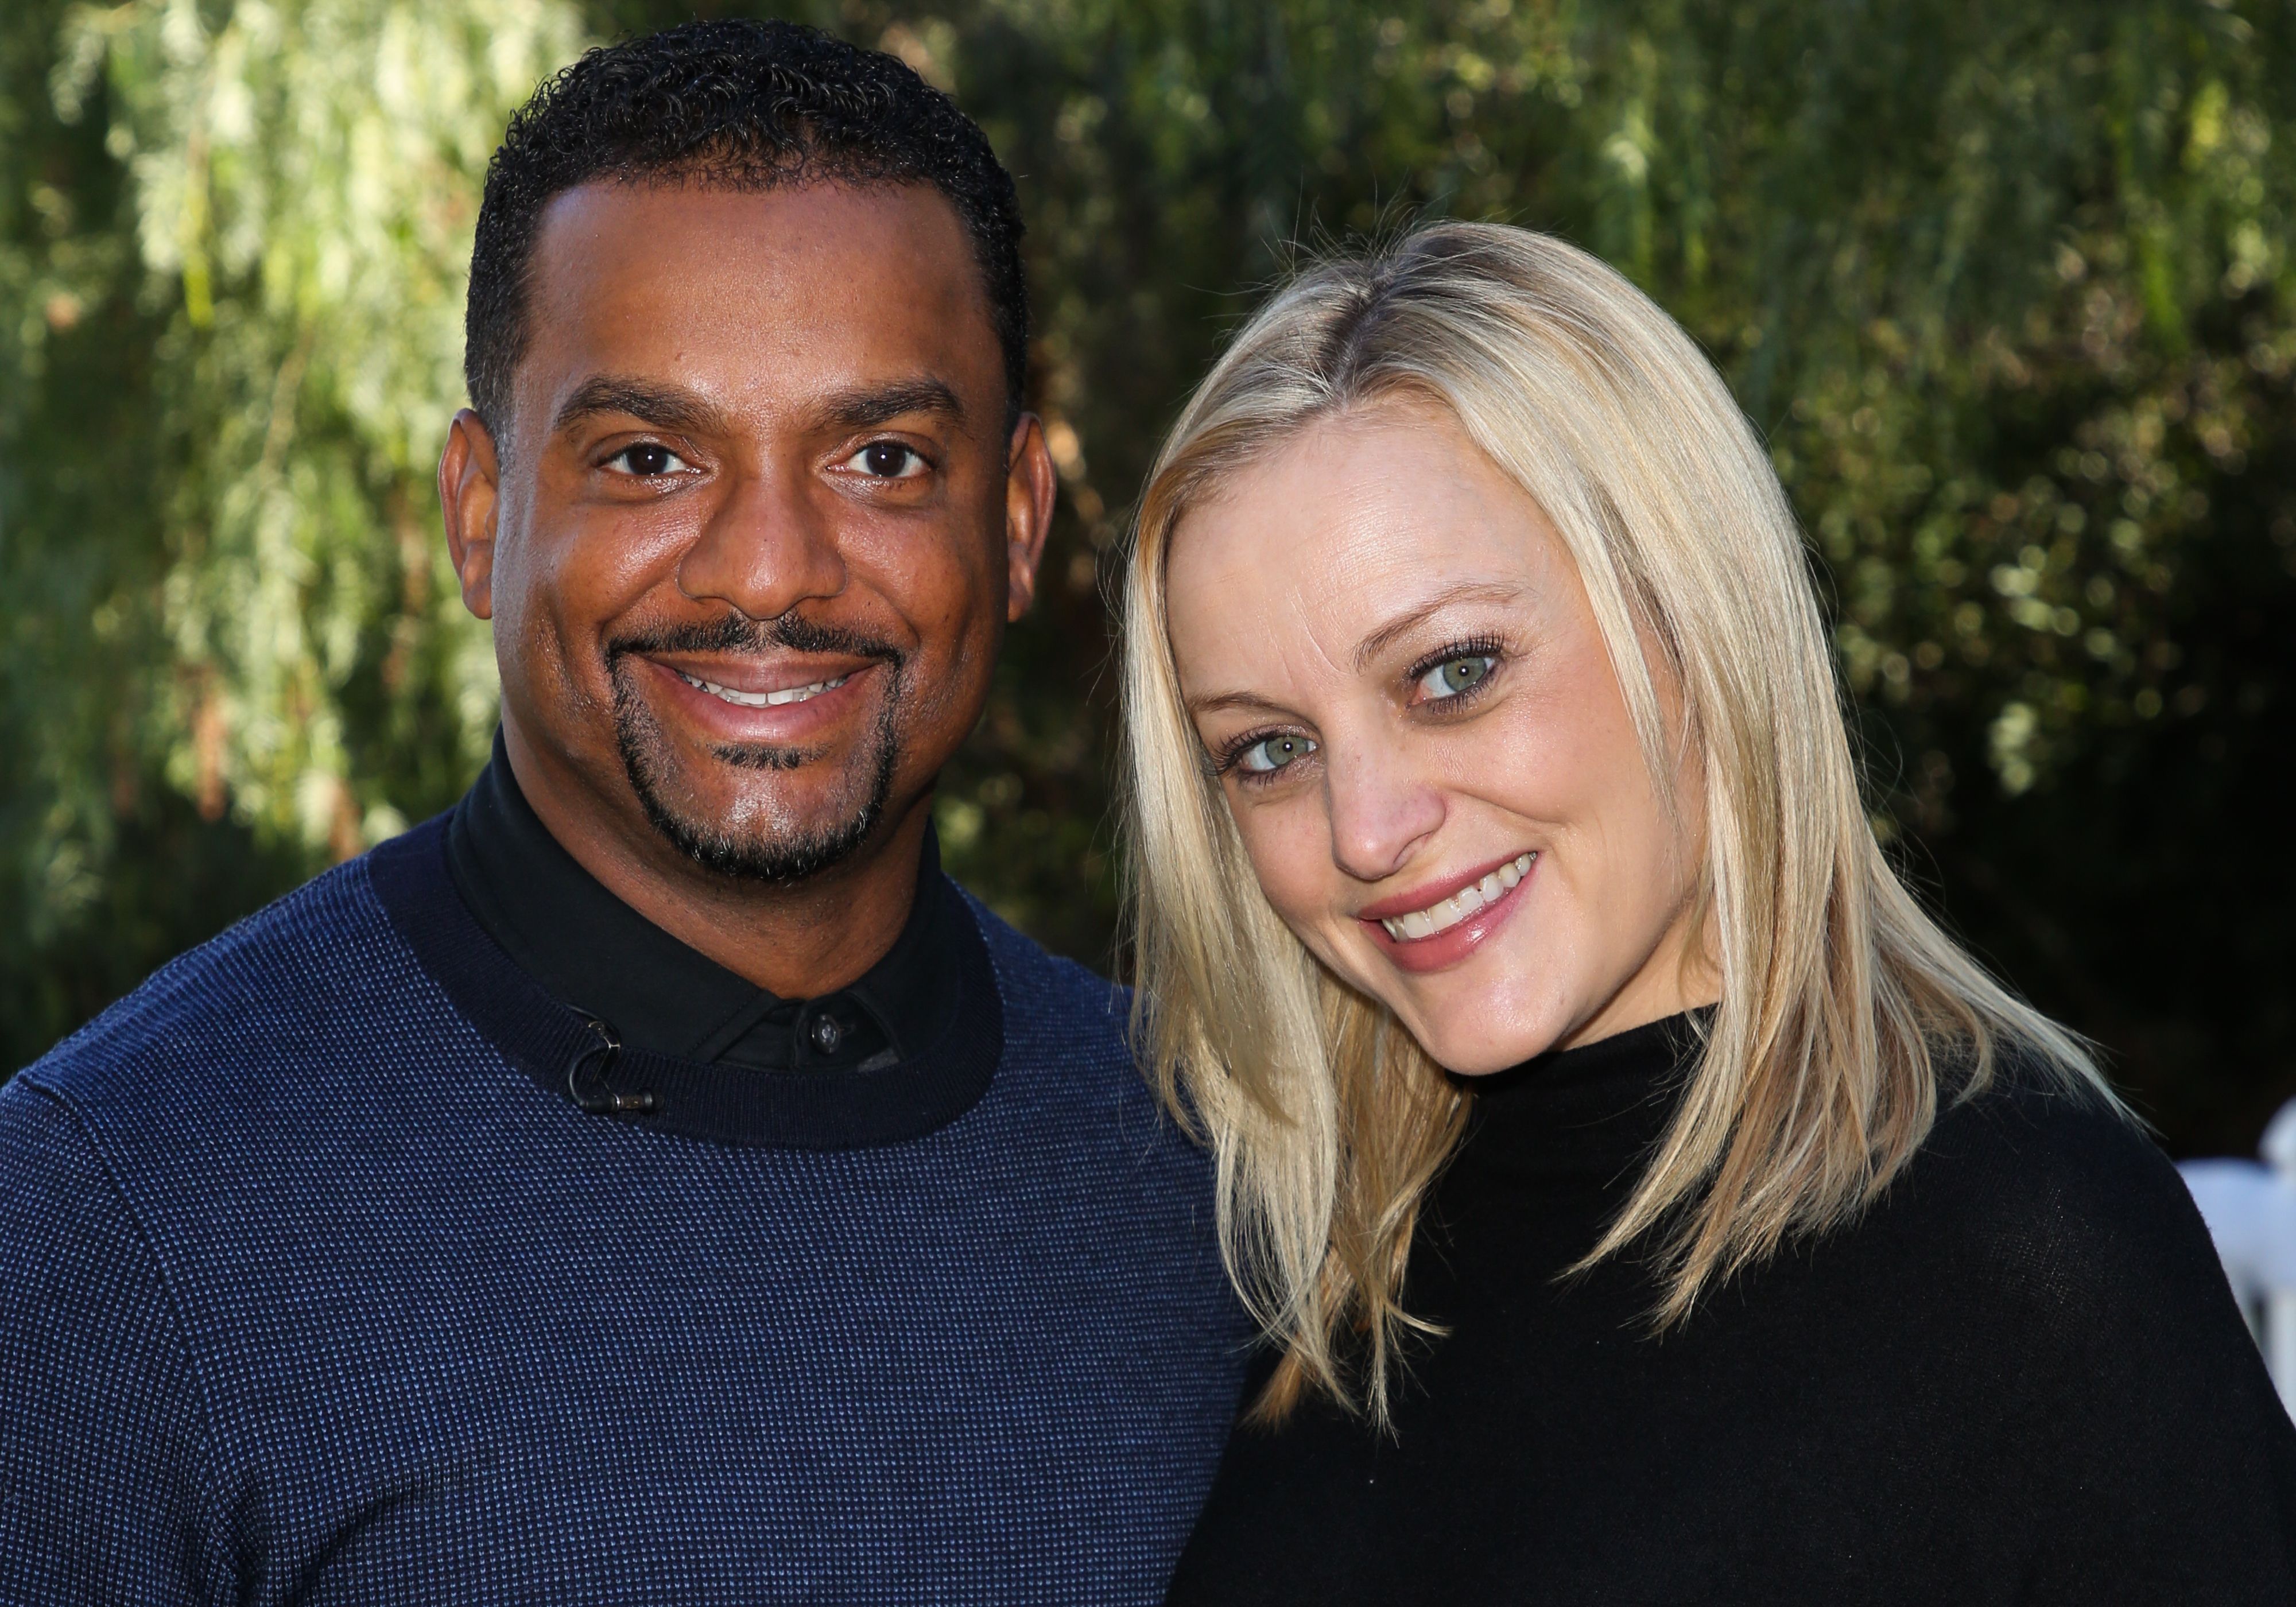 Actor Alfonso Ribeiro and his Wife Angela Unkrich at Hallmark's "Home & Family" at Universal Studios Hollywood on December 15, 2018 | Photo: Getty images